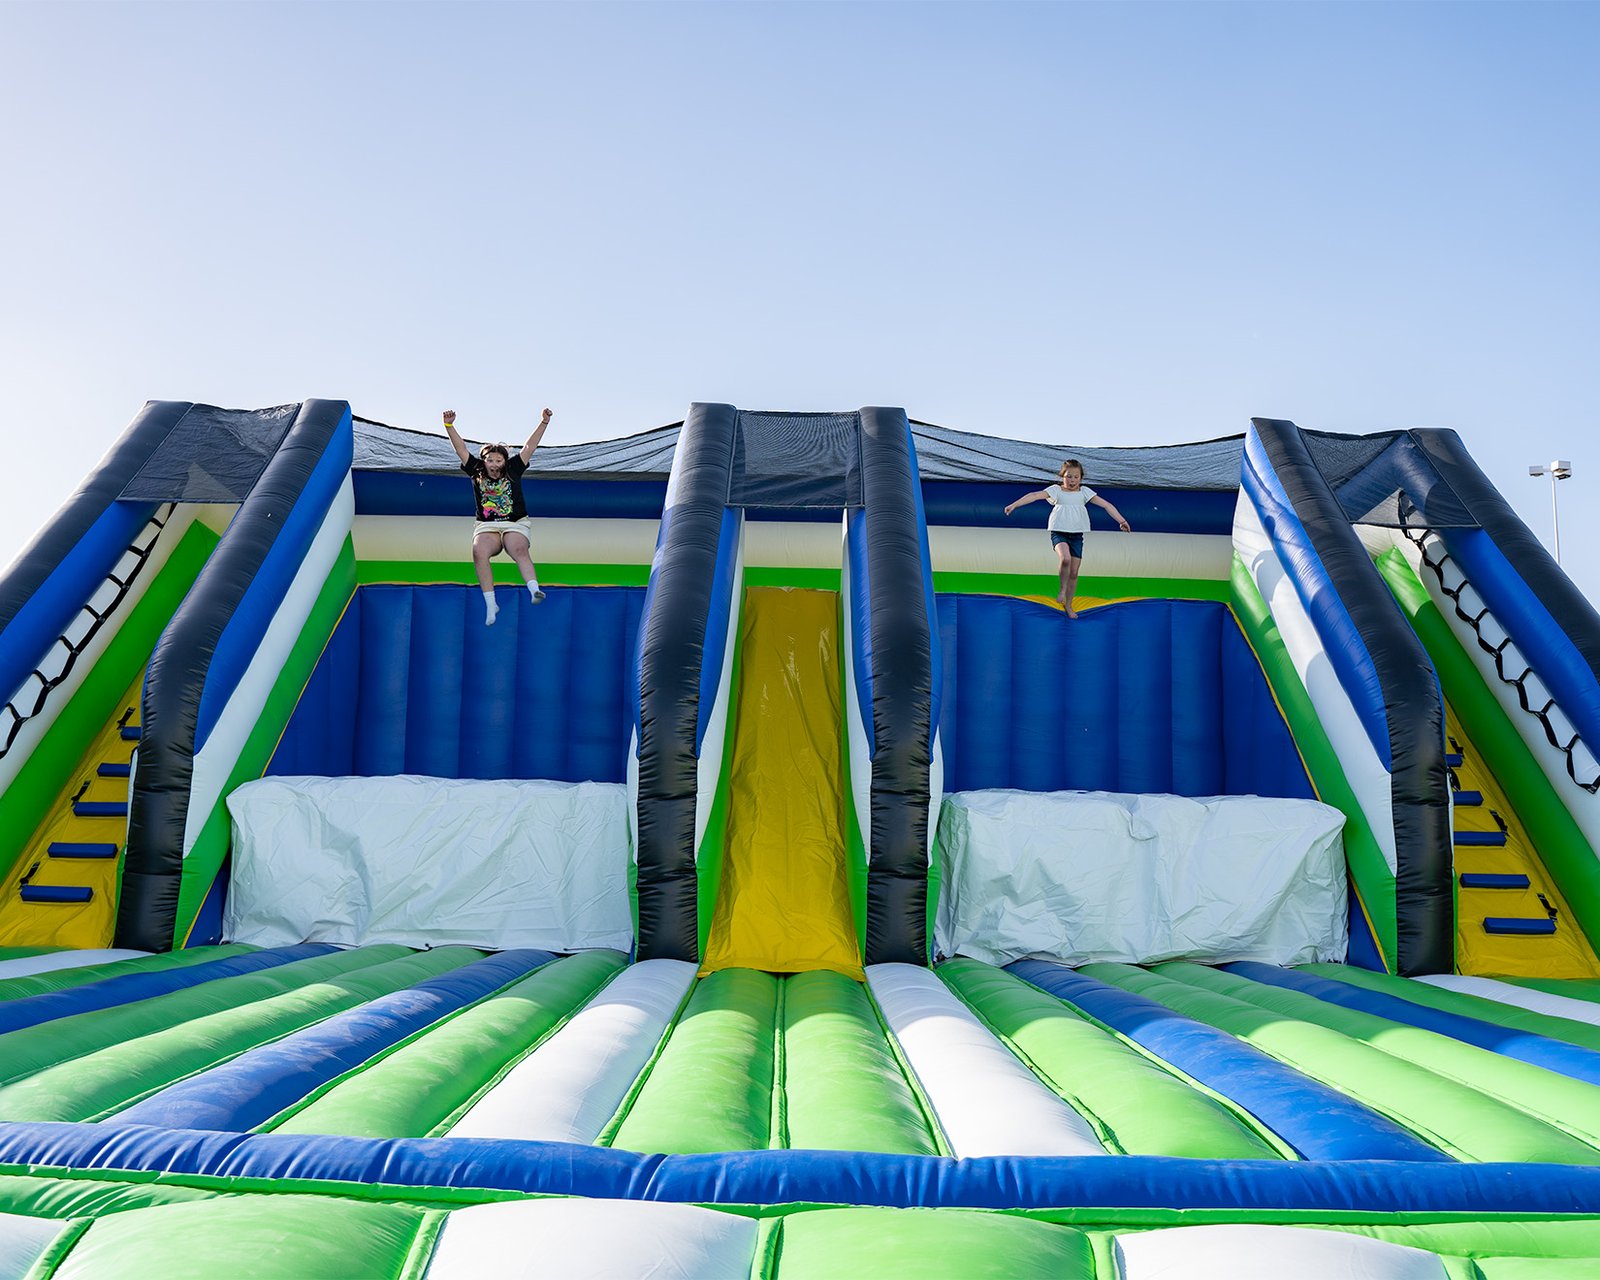 Two girls jumping off platforms onto giant air bags at one of the world's largest bounce houses